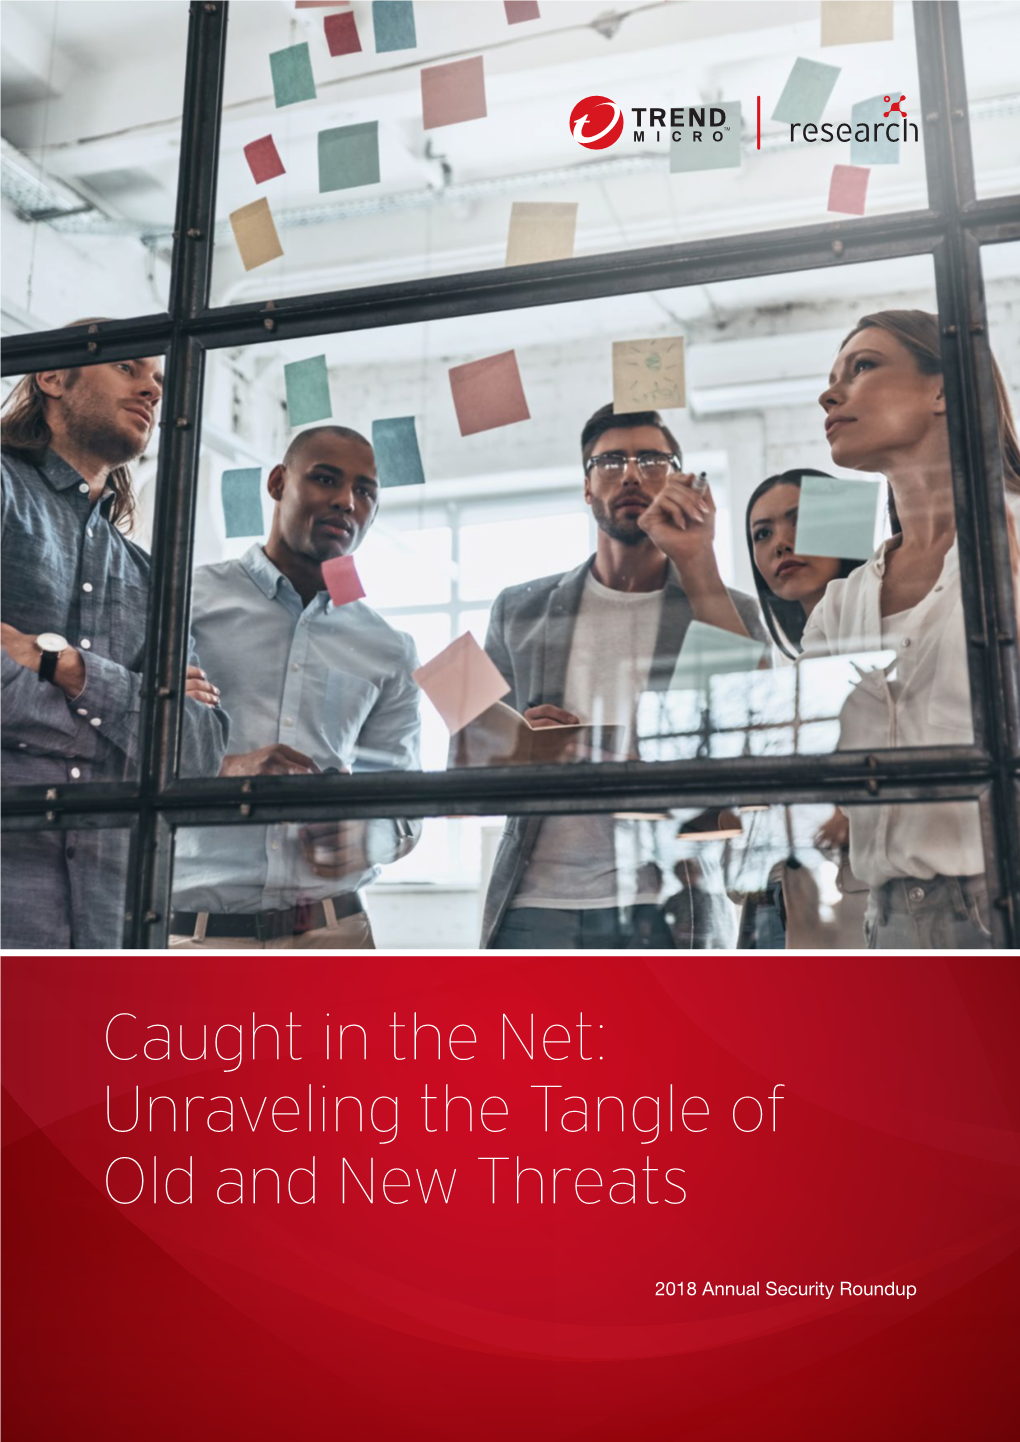 Caught in the Net: Unraveling the Tangle of Old and New Threats